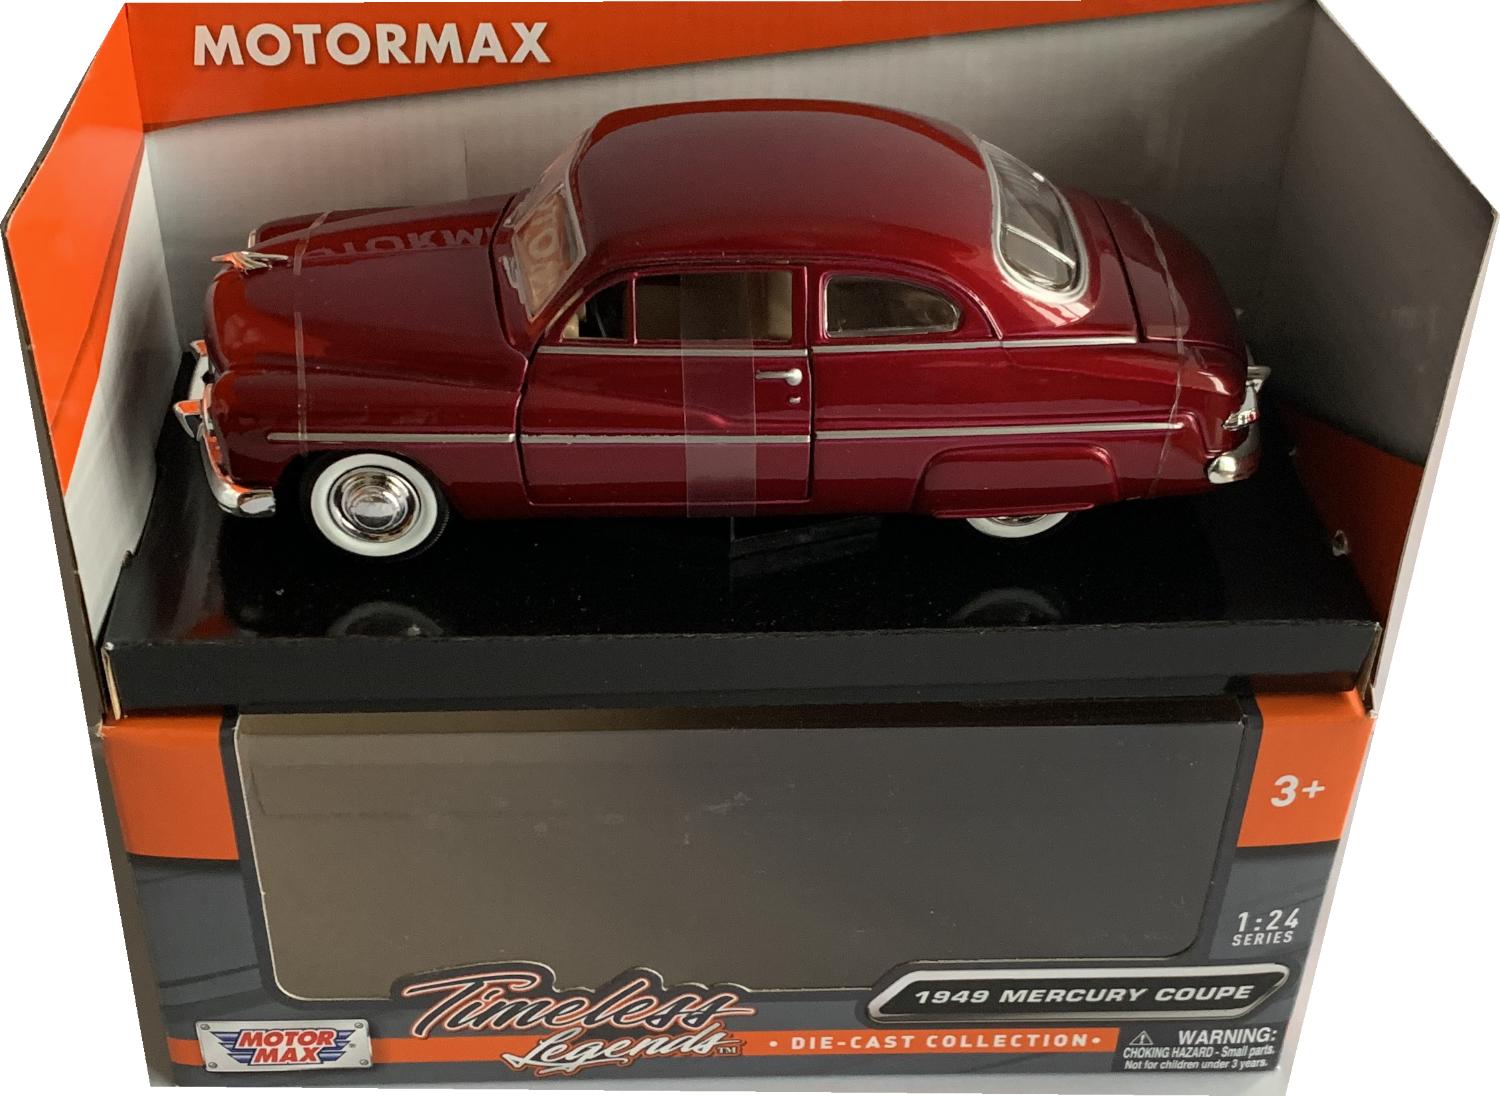 A good reproduction of the Mercury Coupe with detail throughout, all authentically recreated.  The model is presented in a window display box, the car is approx. 21 cm long and the presentation box is 24.5 cm